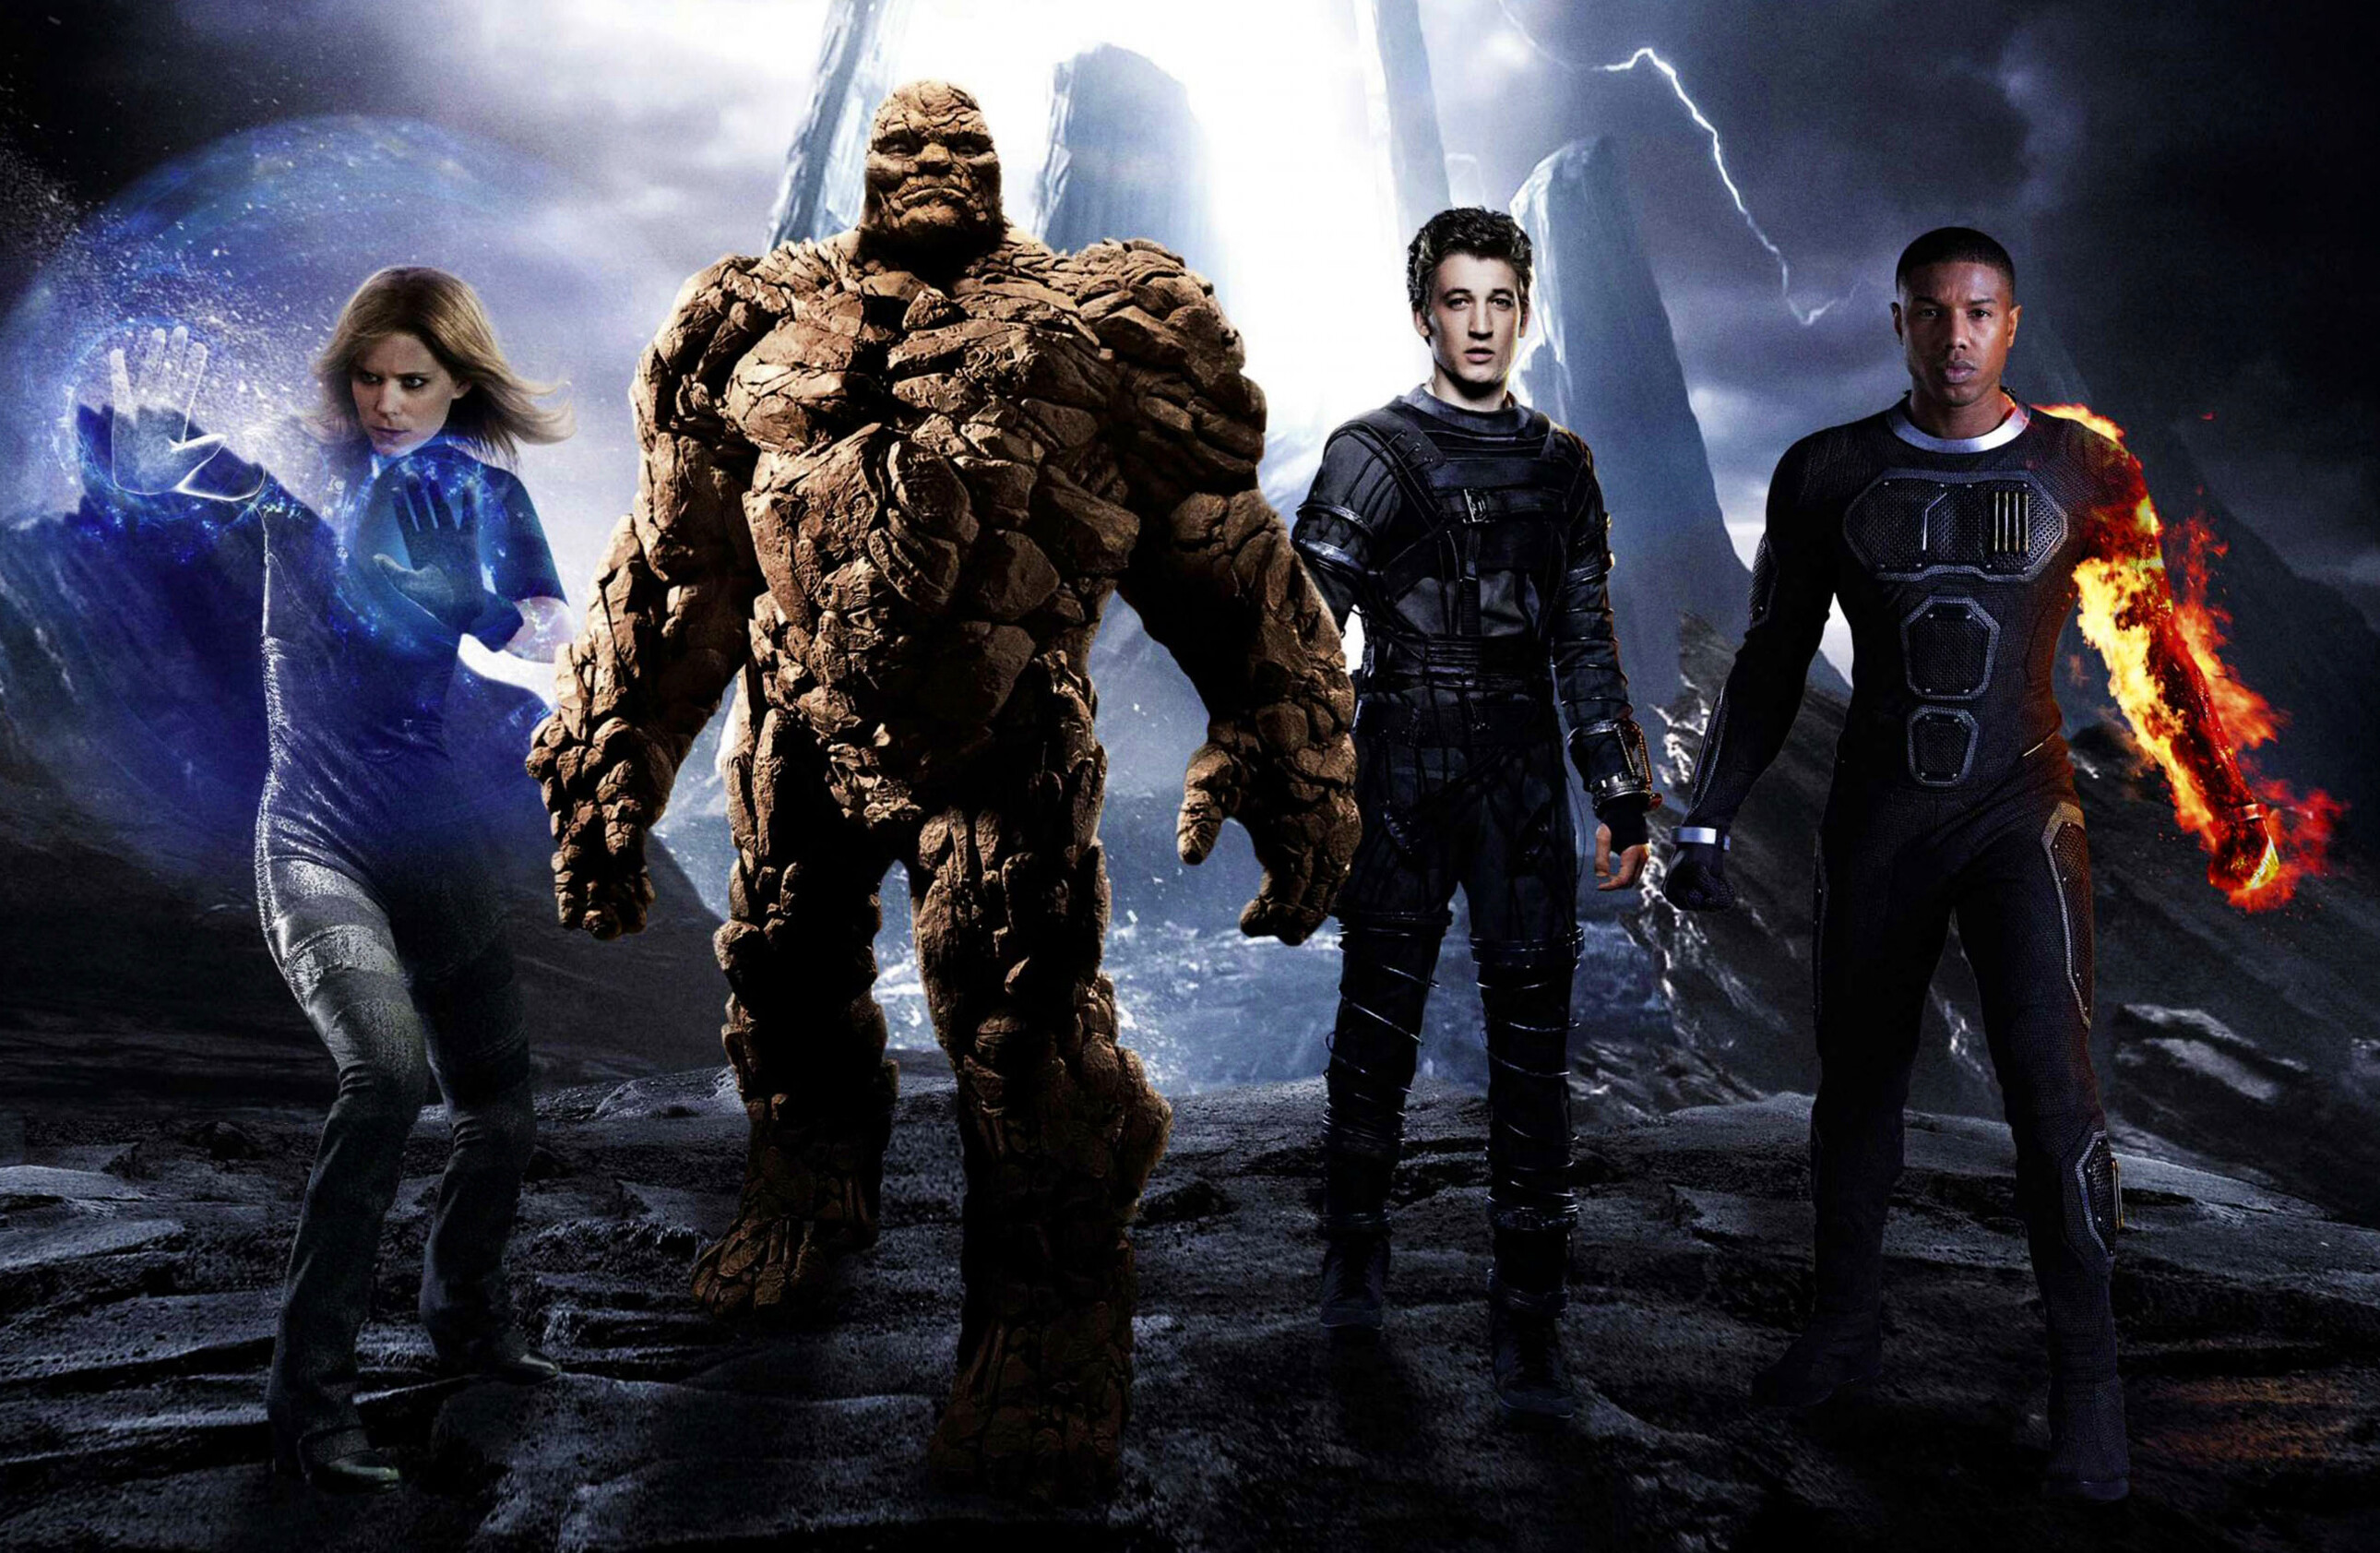 Fantastic 4: The film follows a group of intelligent teenagers that build a transdimensional portal, causing them to gain superhuman abilities. 2580x1690 HD Background.